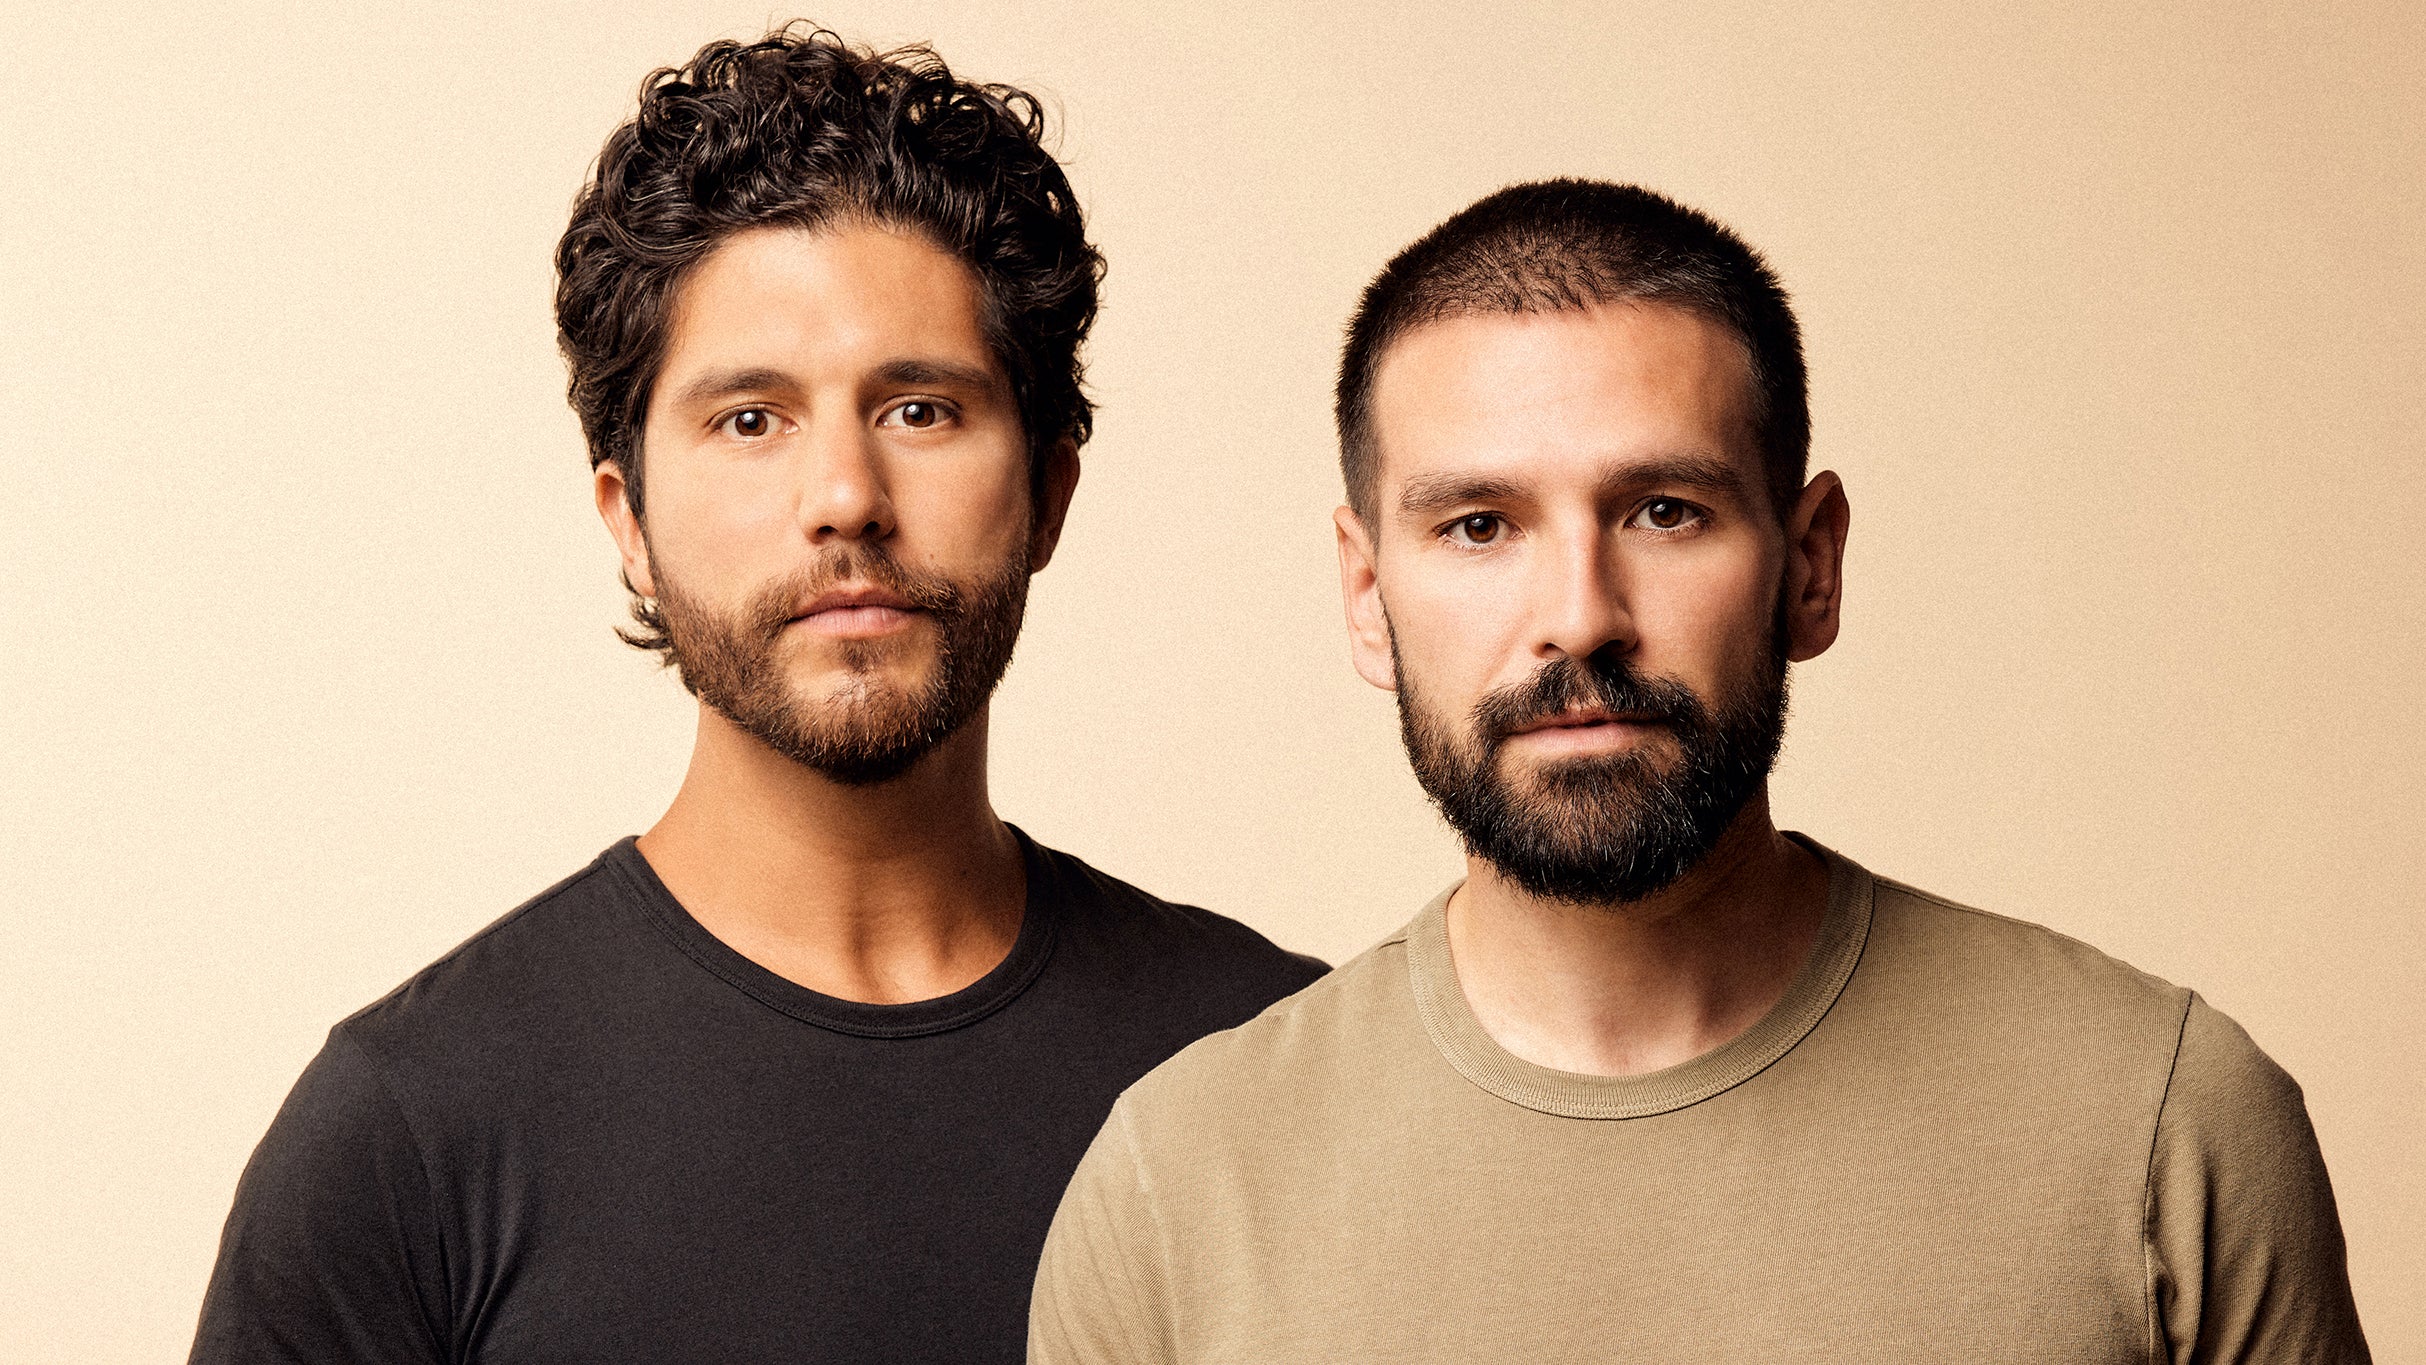 Dan + Shay: Heartbreak On The Map Tour free pre-sale pasword for early tickets in Bend